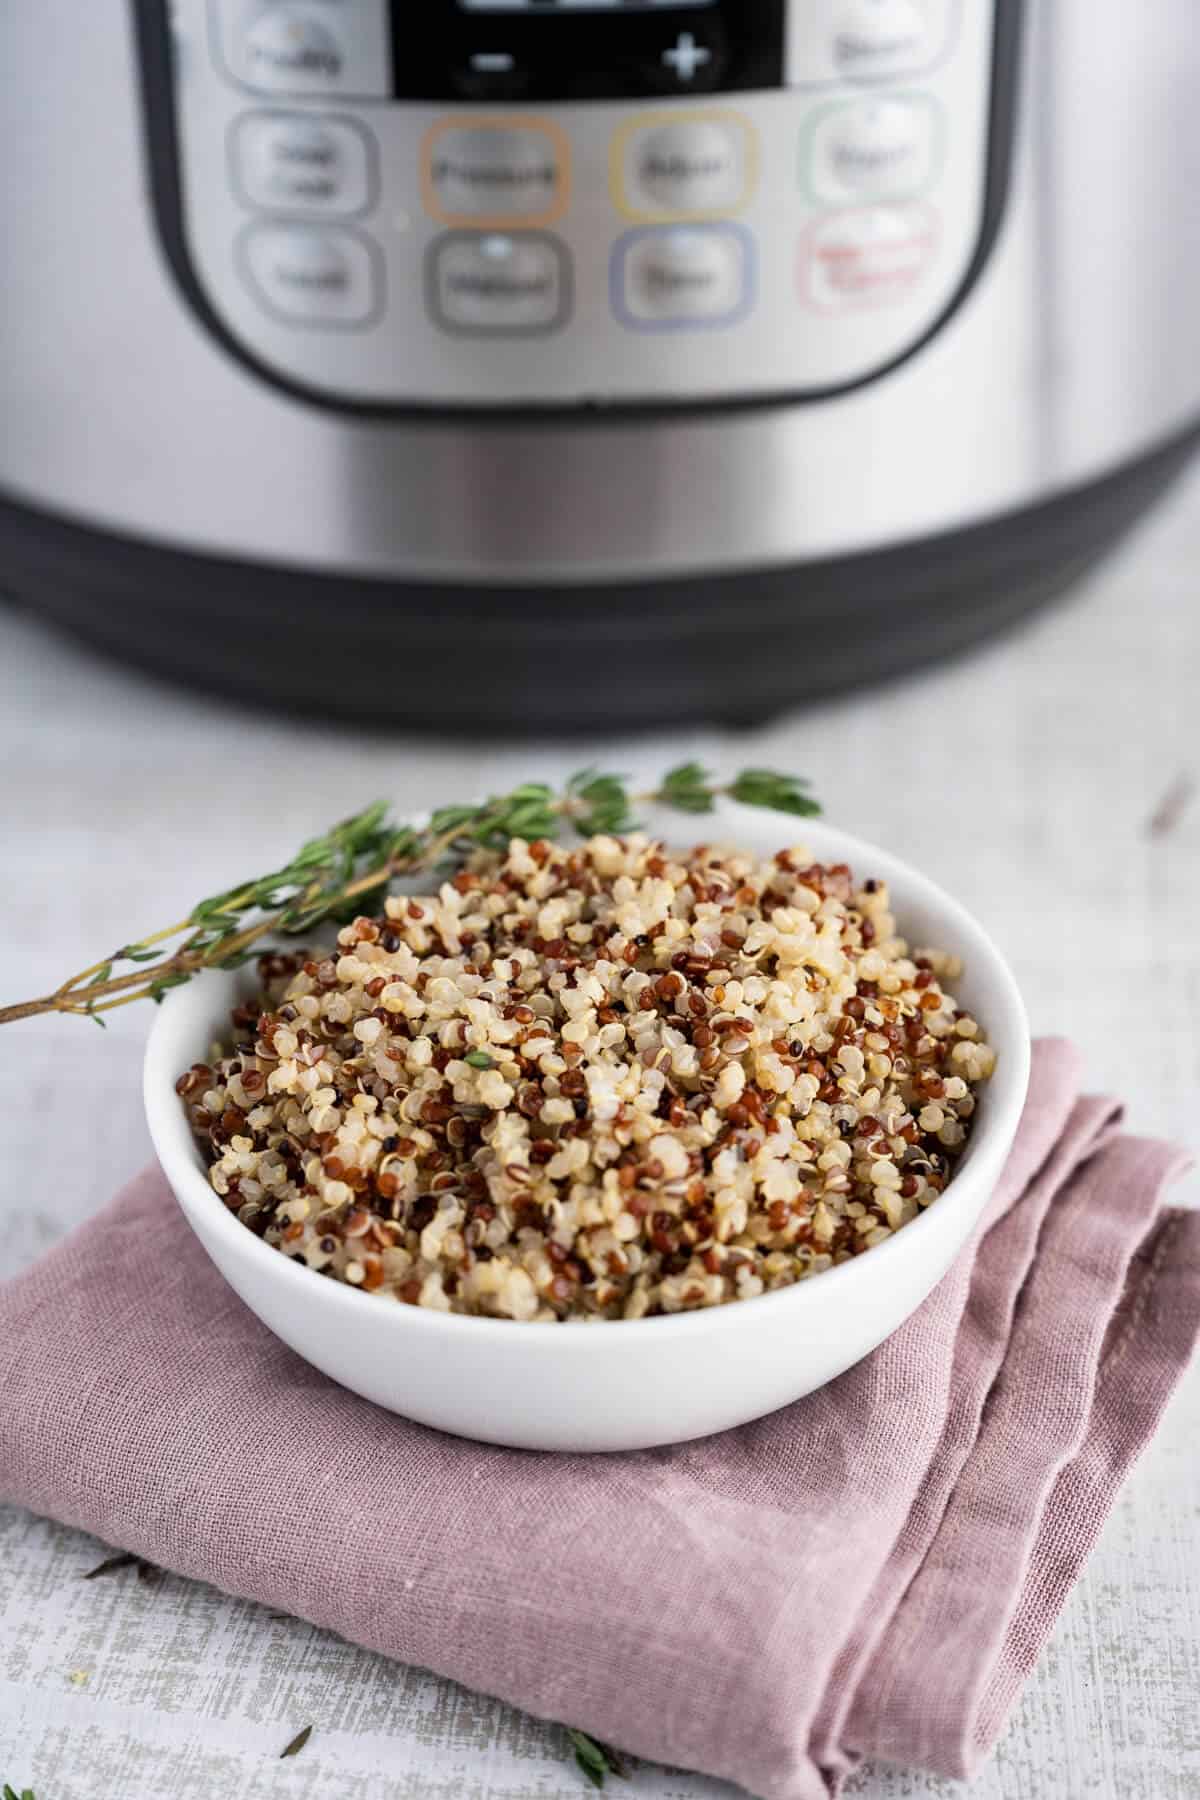 Cooked quinoa in a white serving dish in front of a pressure cooker.